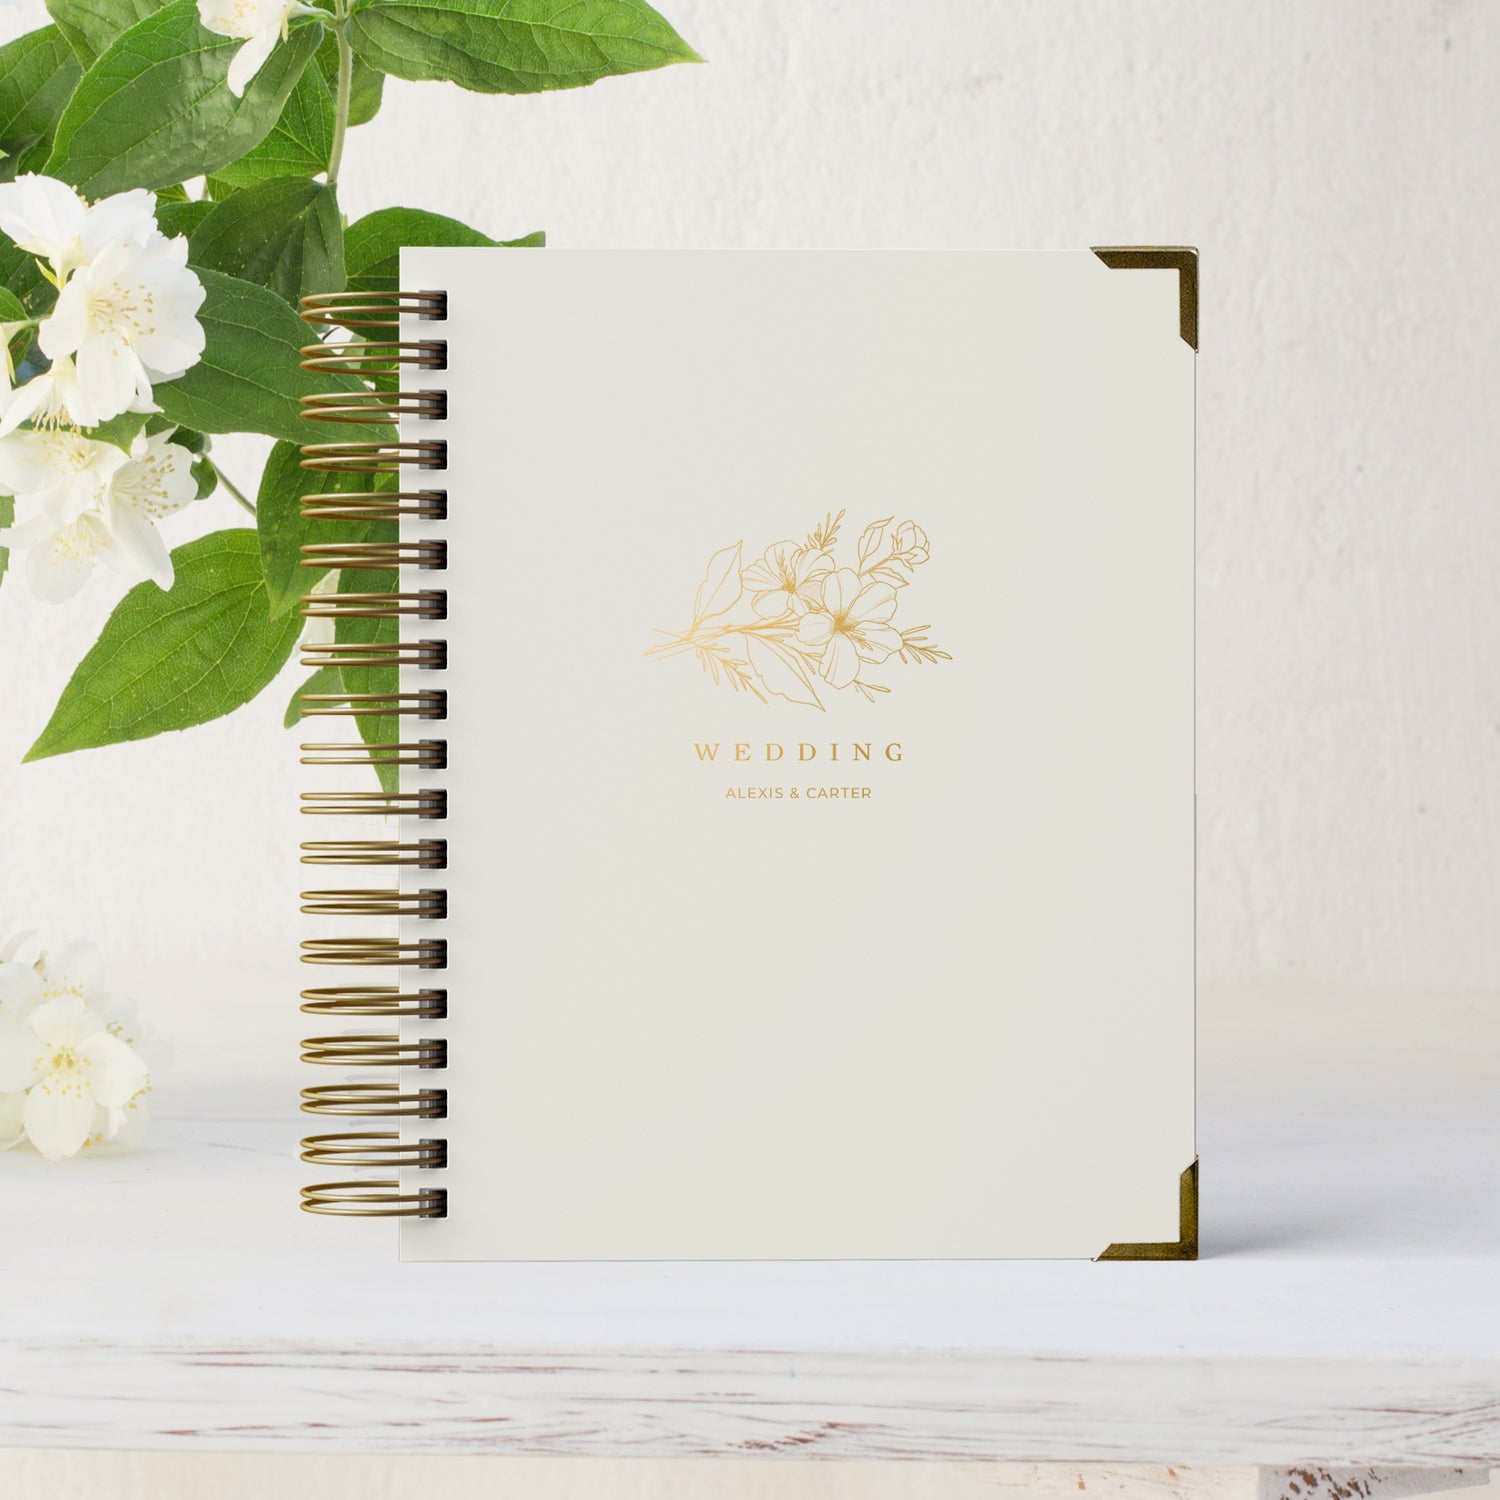 Meet our bestselling wedding planner, the Minimalist Floral Sprig design - the most detailed planner book a bride can buy